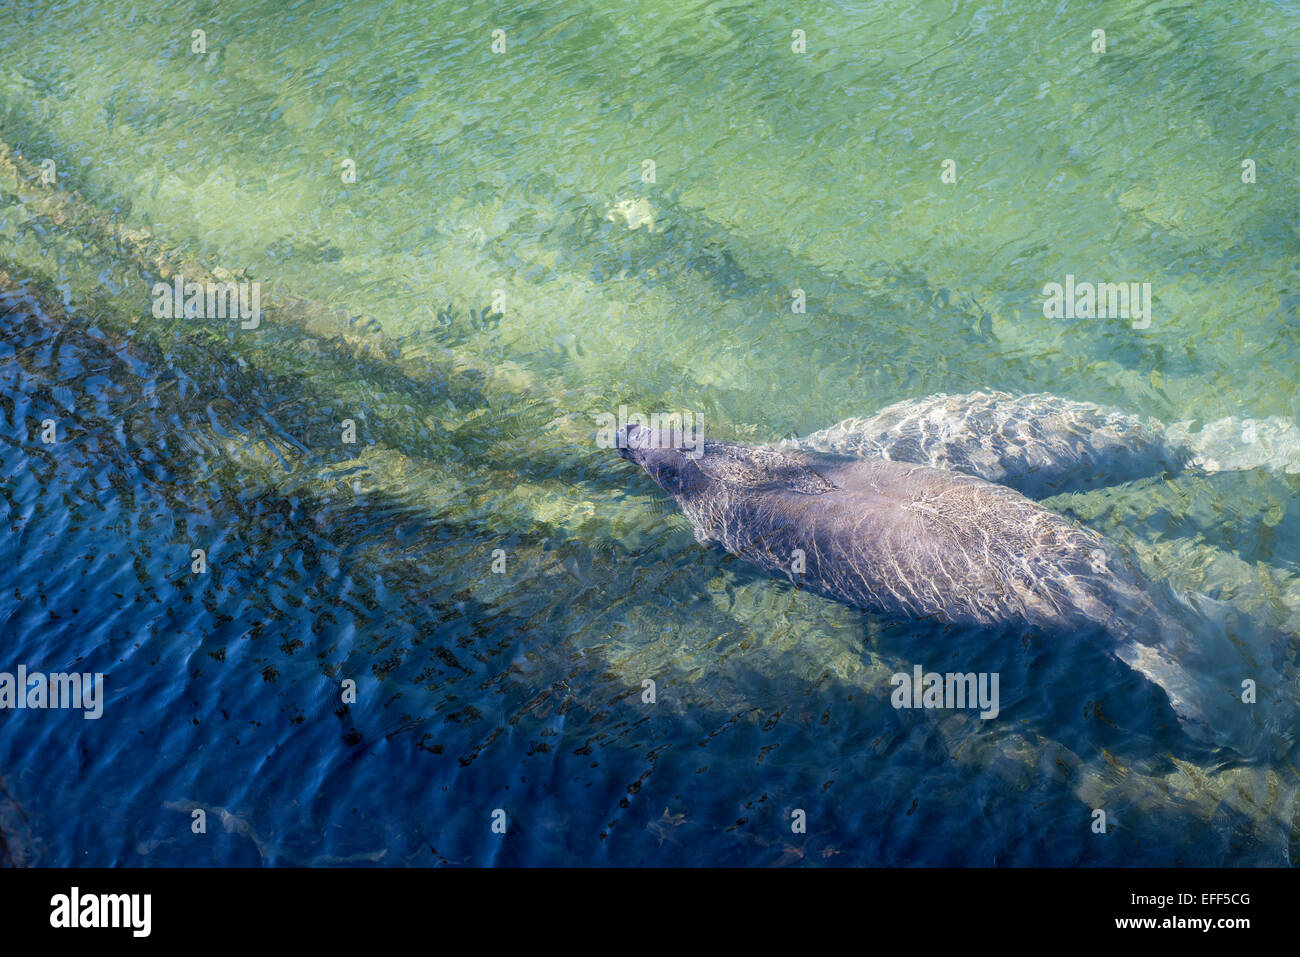 Manatee surfacing to breath seen from above the clear water of Blue Spring State Park, Florida. Stock Photo